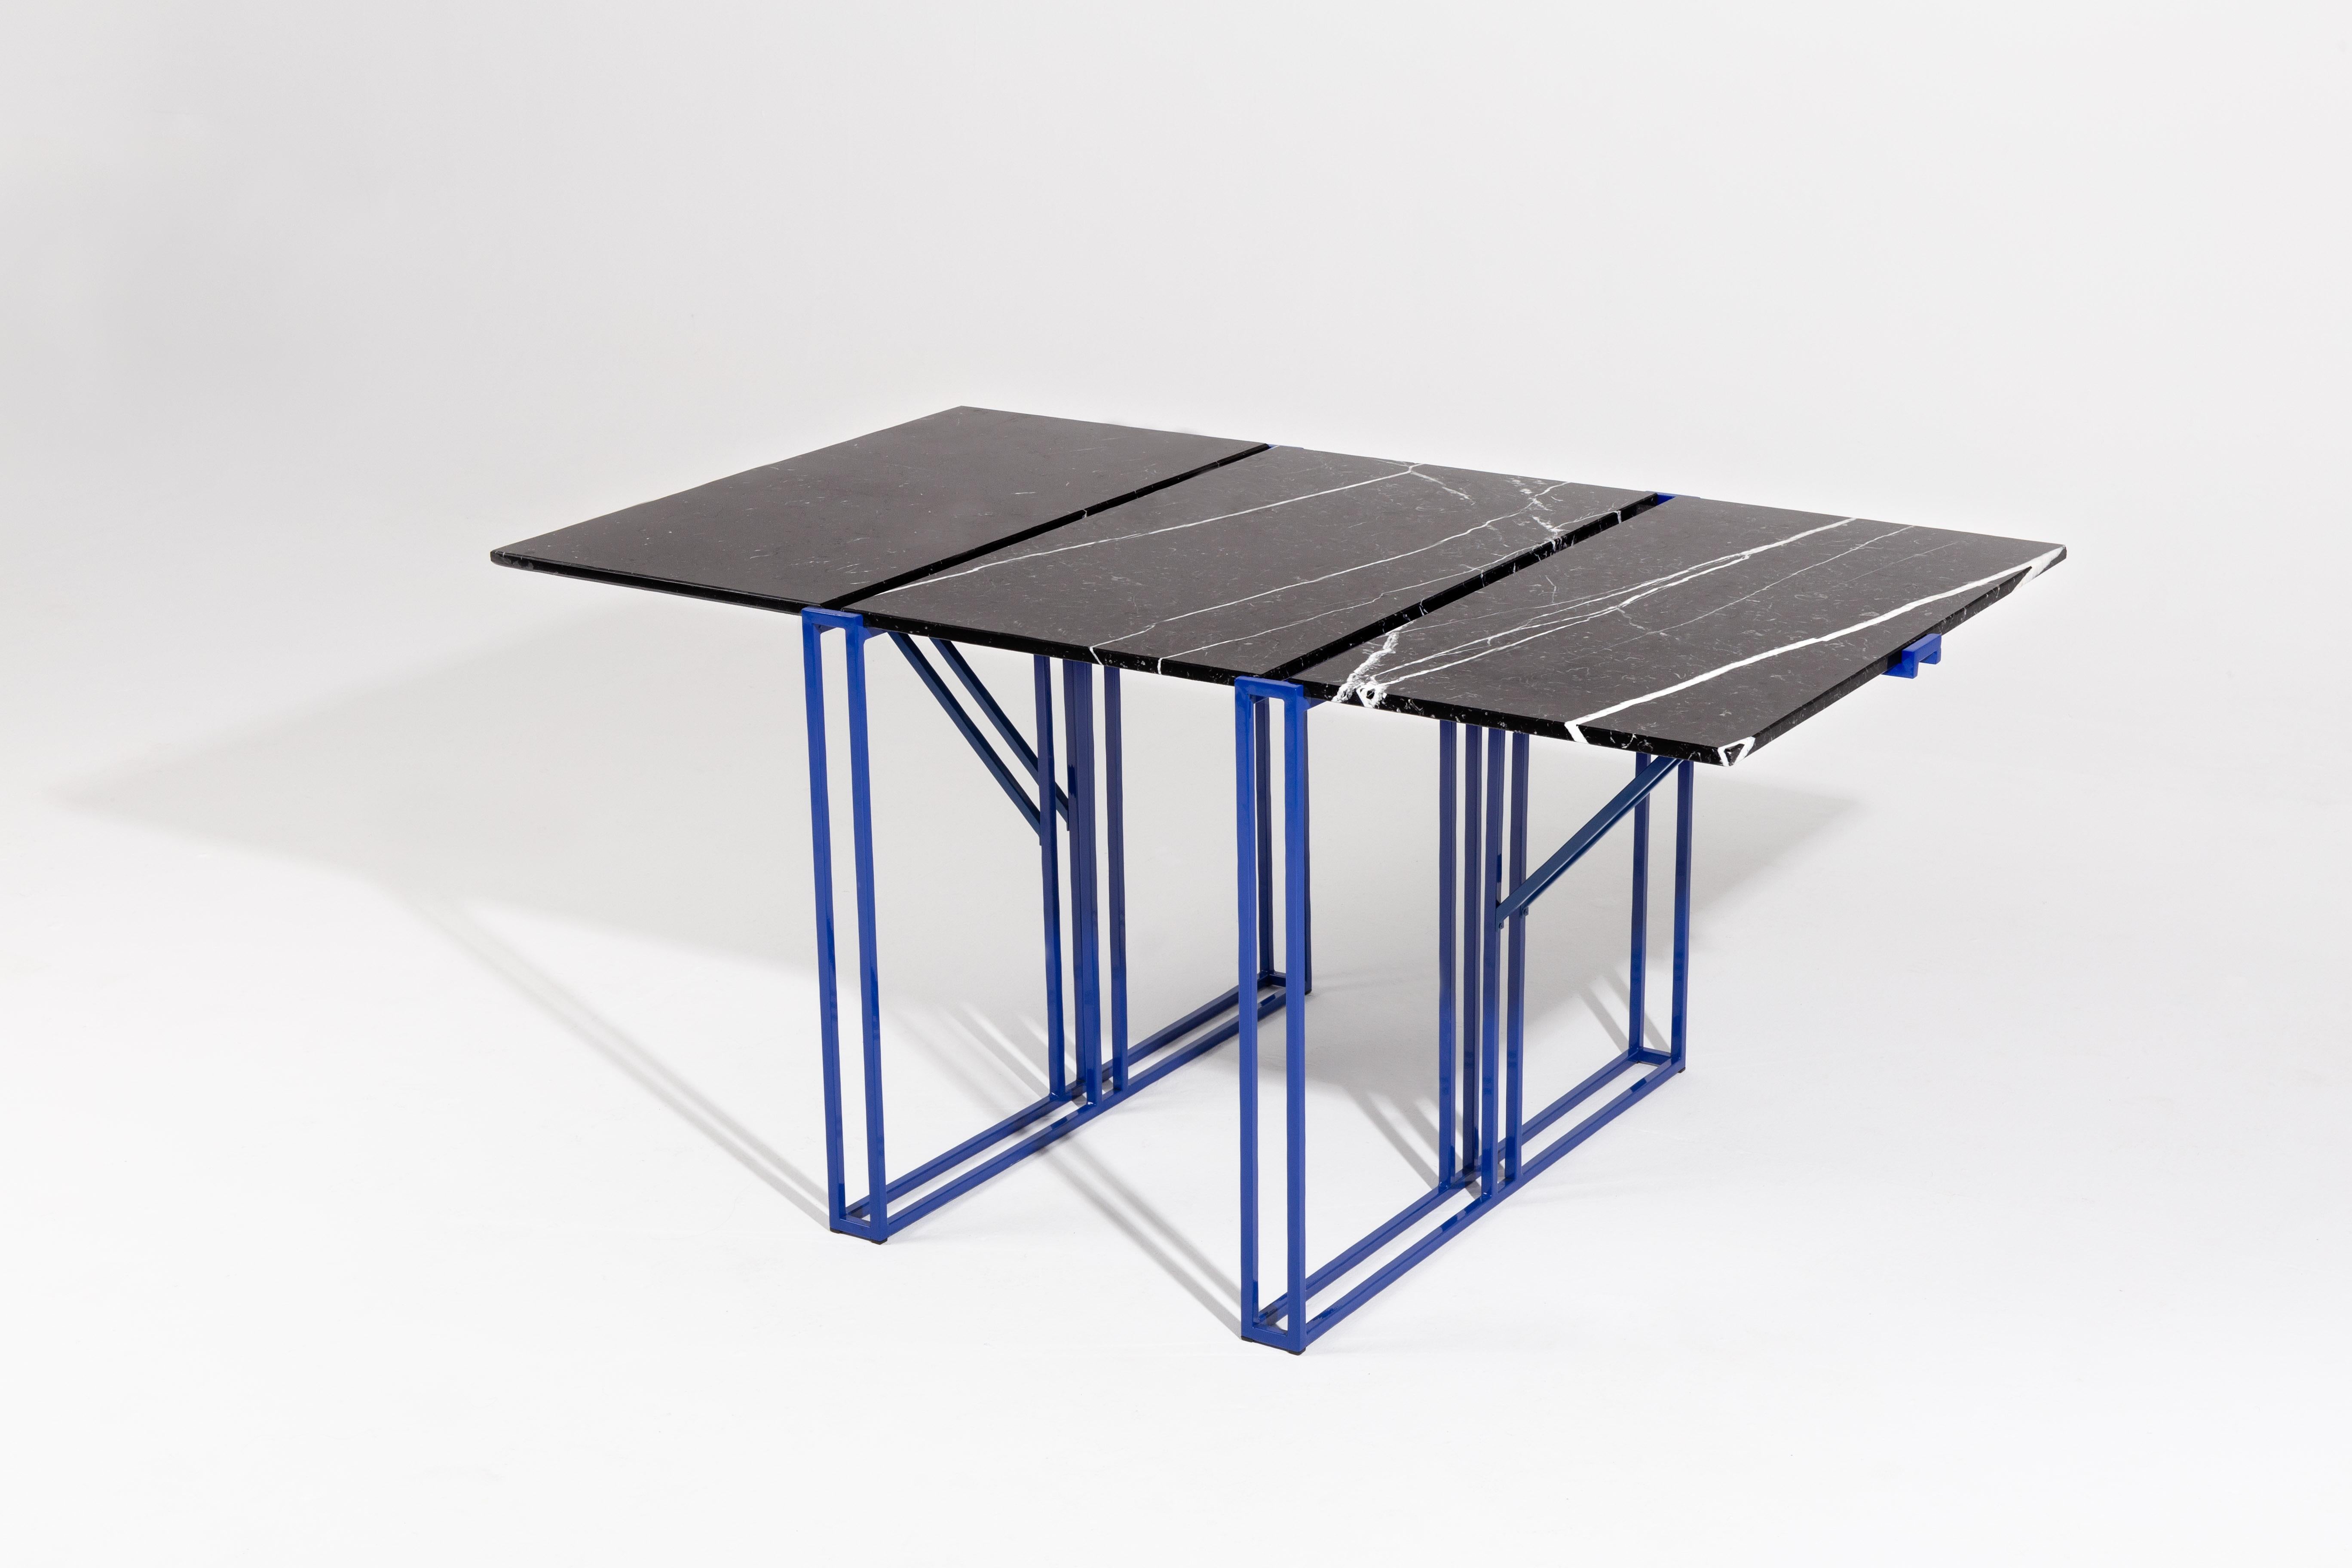 Sculptural dining table by Ángel Mombiedro
Measures cm: 133 x 172 x 80 cm.
Inches: 52.5 x 68 x 32 in.
RAL metallic structure with natural Markina black and white marble shelves.
Can be made to order in other colors/dimensions upon